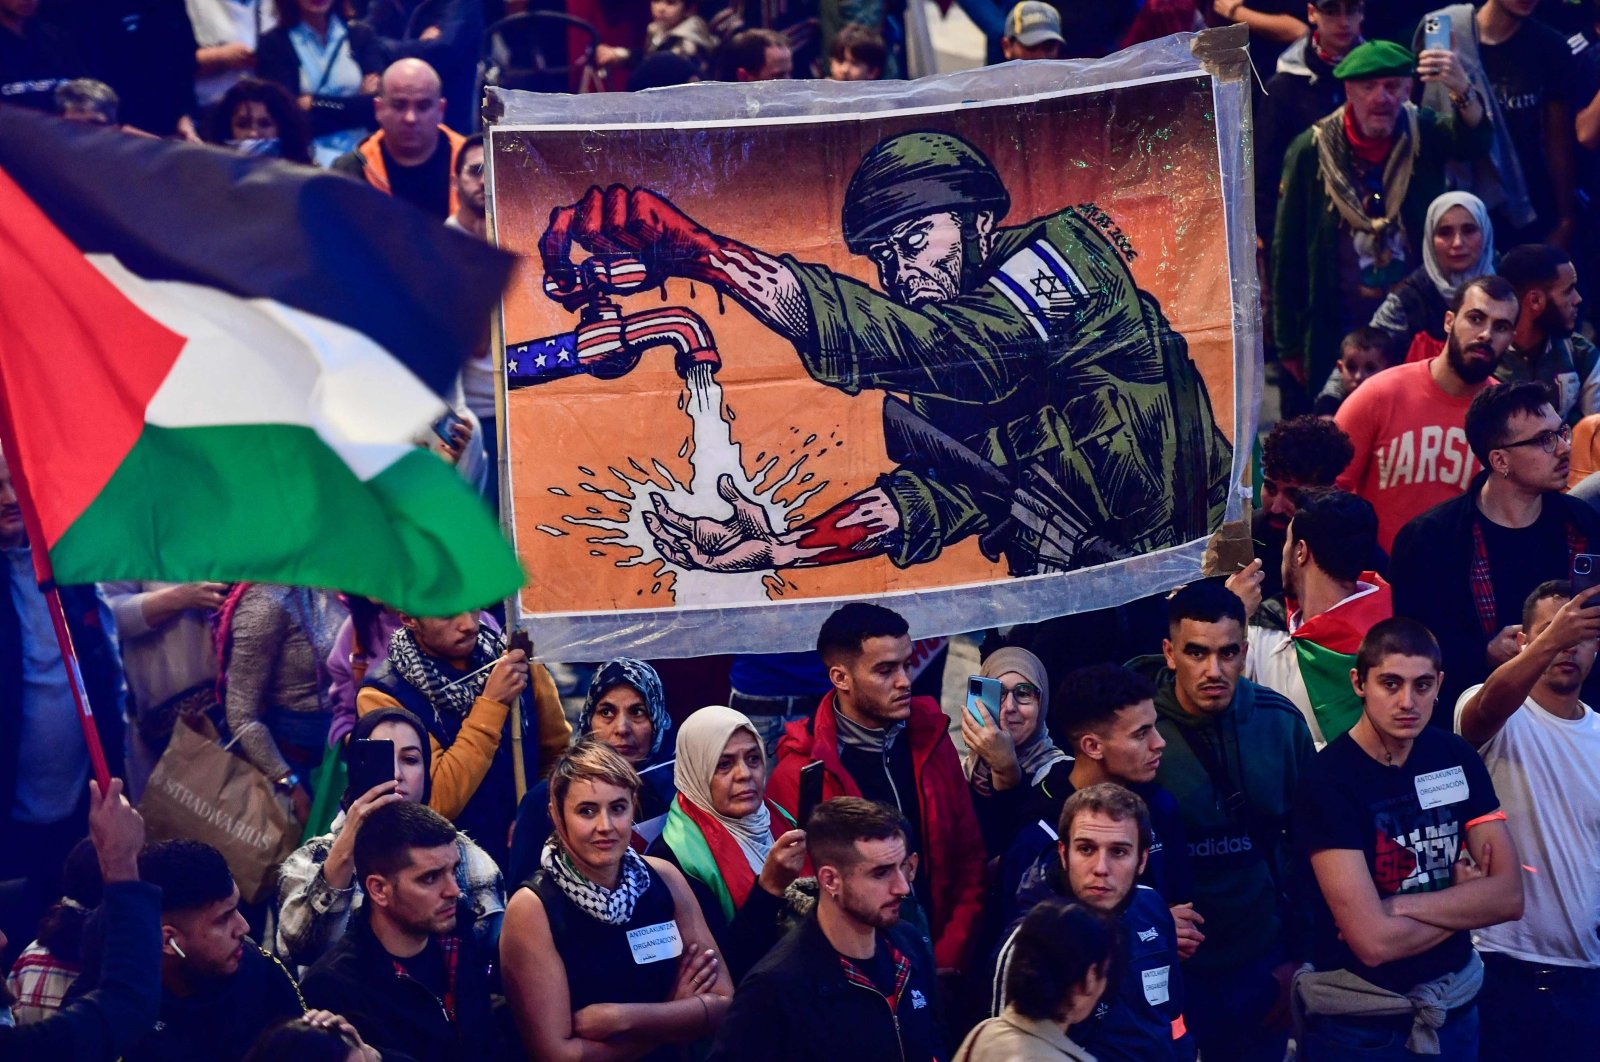 Demonstrators wave Palestinian flags and hold signs as they take part in a rally with slogan "Long live the Palestinian resistance. Genocidal Zionism", in support of the Palestinian people, in Bilbao, Spain, Oct. 28, 2023. (AFP Photo)